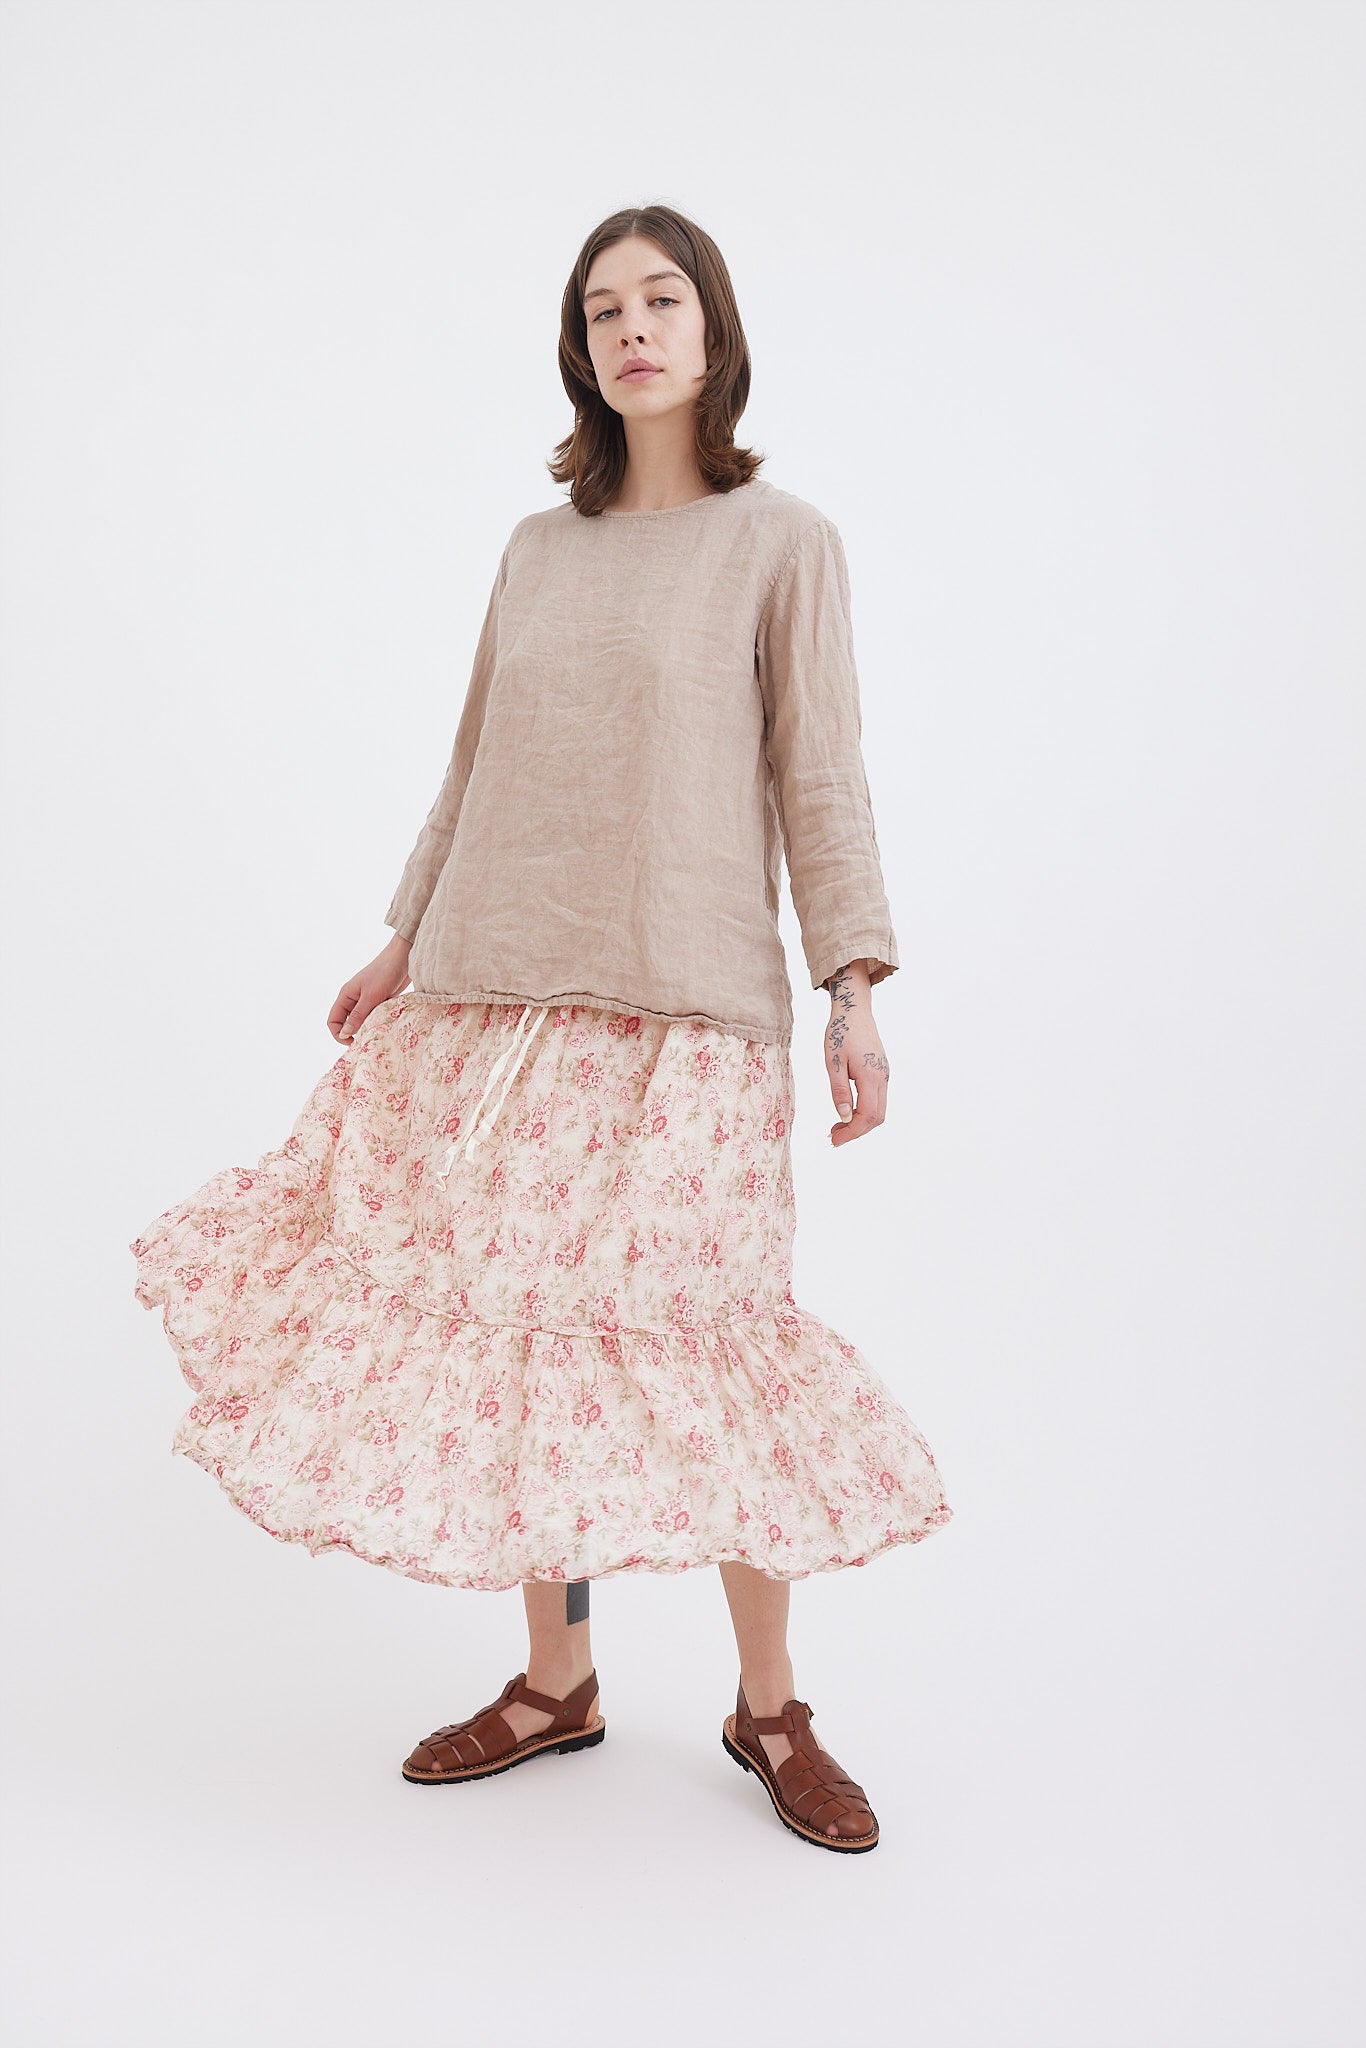 Milly Tiered Skirt Cotton Voile - La Petite Rose